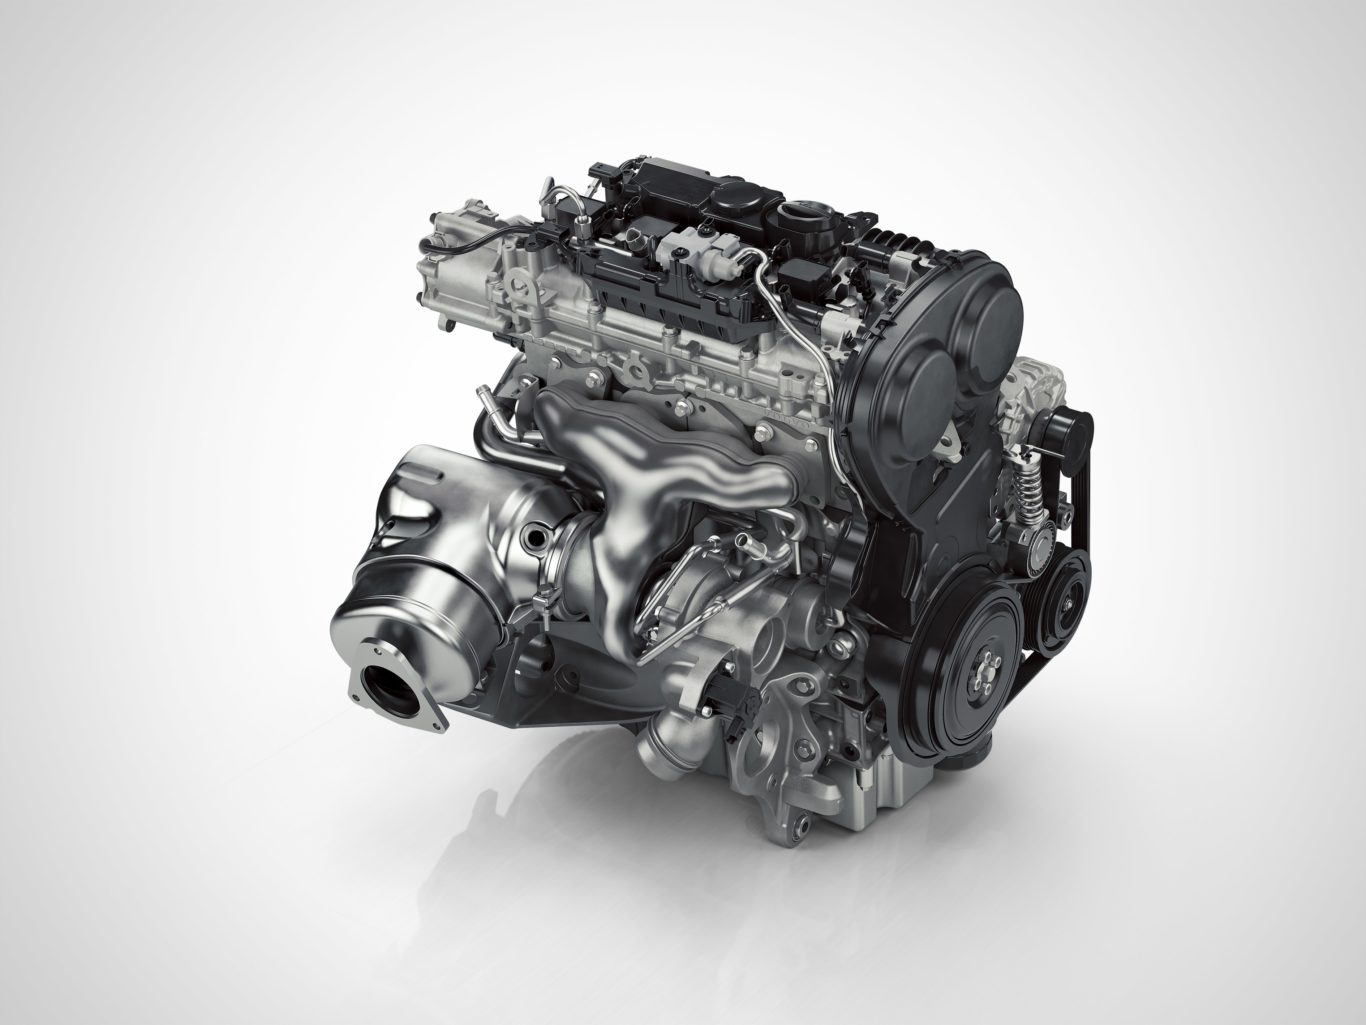 Volvo's three-cylinder petrol is one of the most efficient engines on sale today